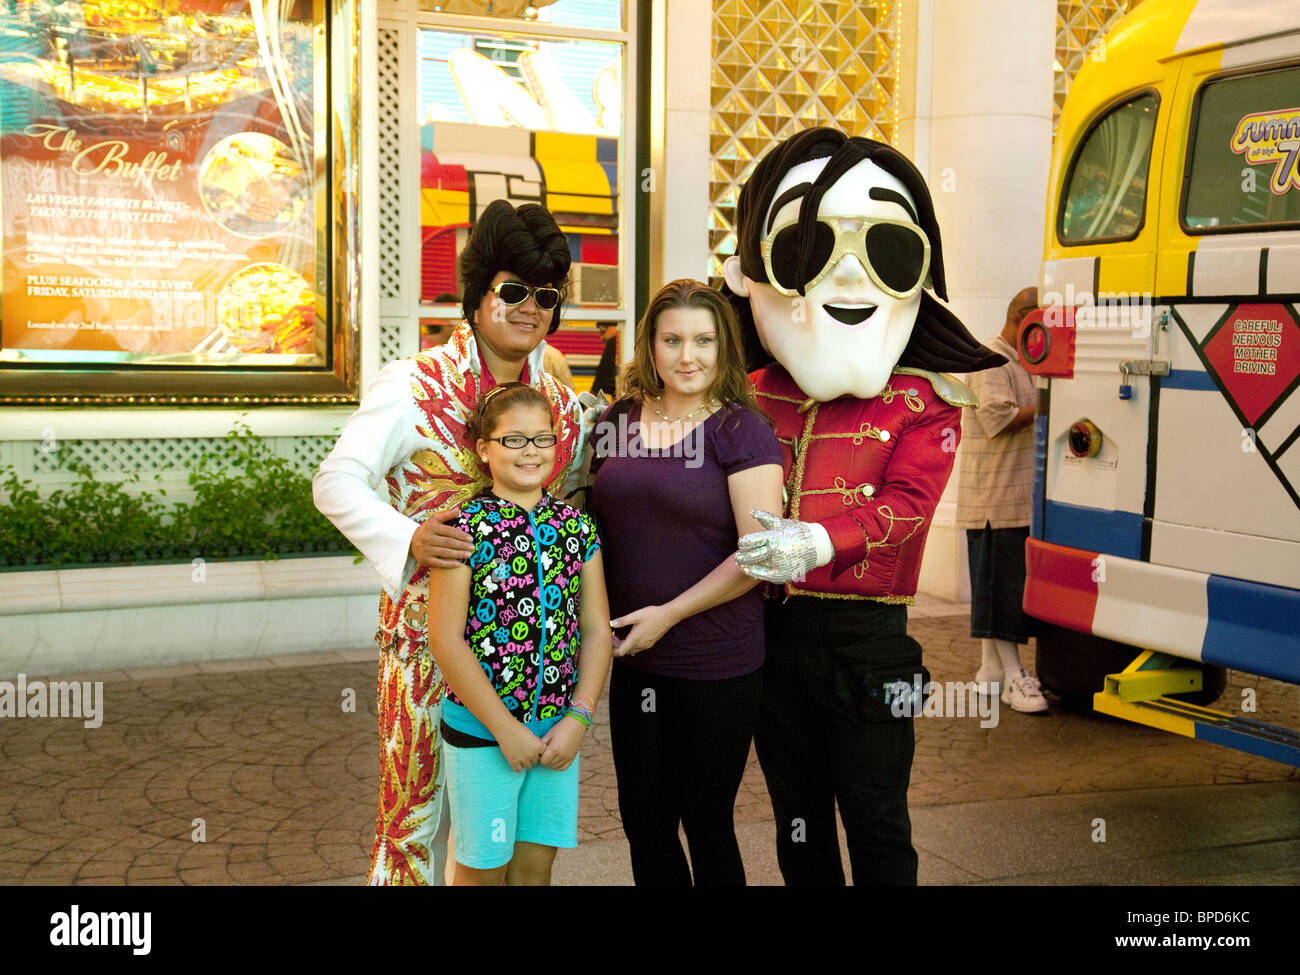 A mother and daughter pose with Elvis and Michael Jackson imitators, Fremont Street, Las Vegas Nevada, USA Stock Photo